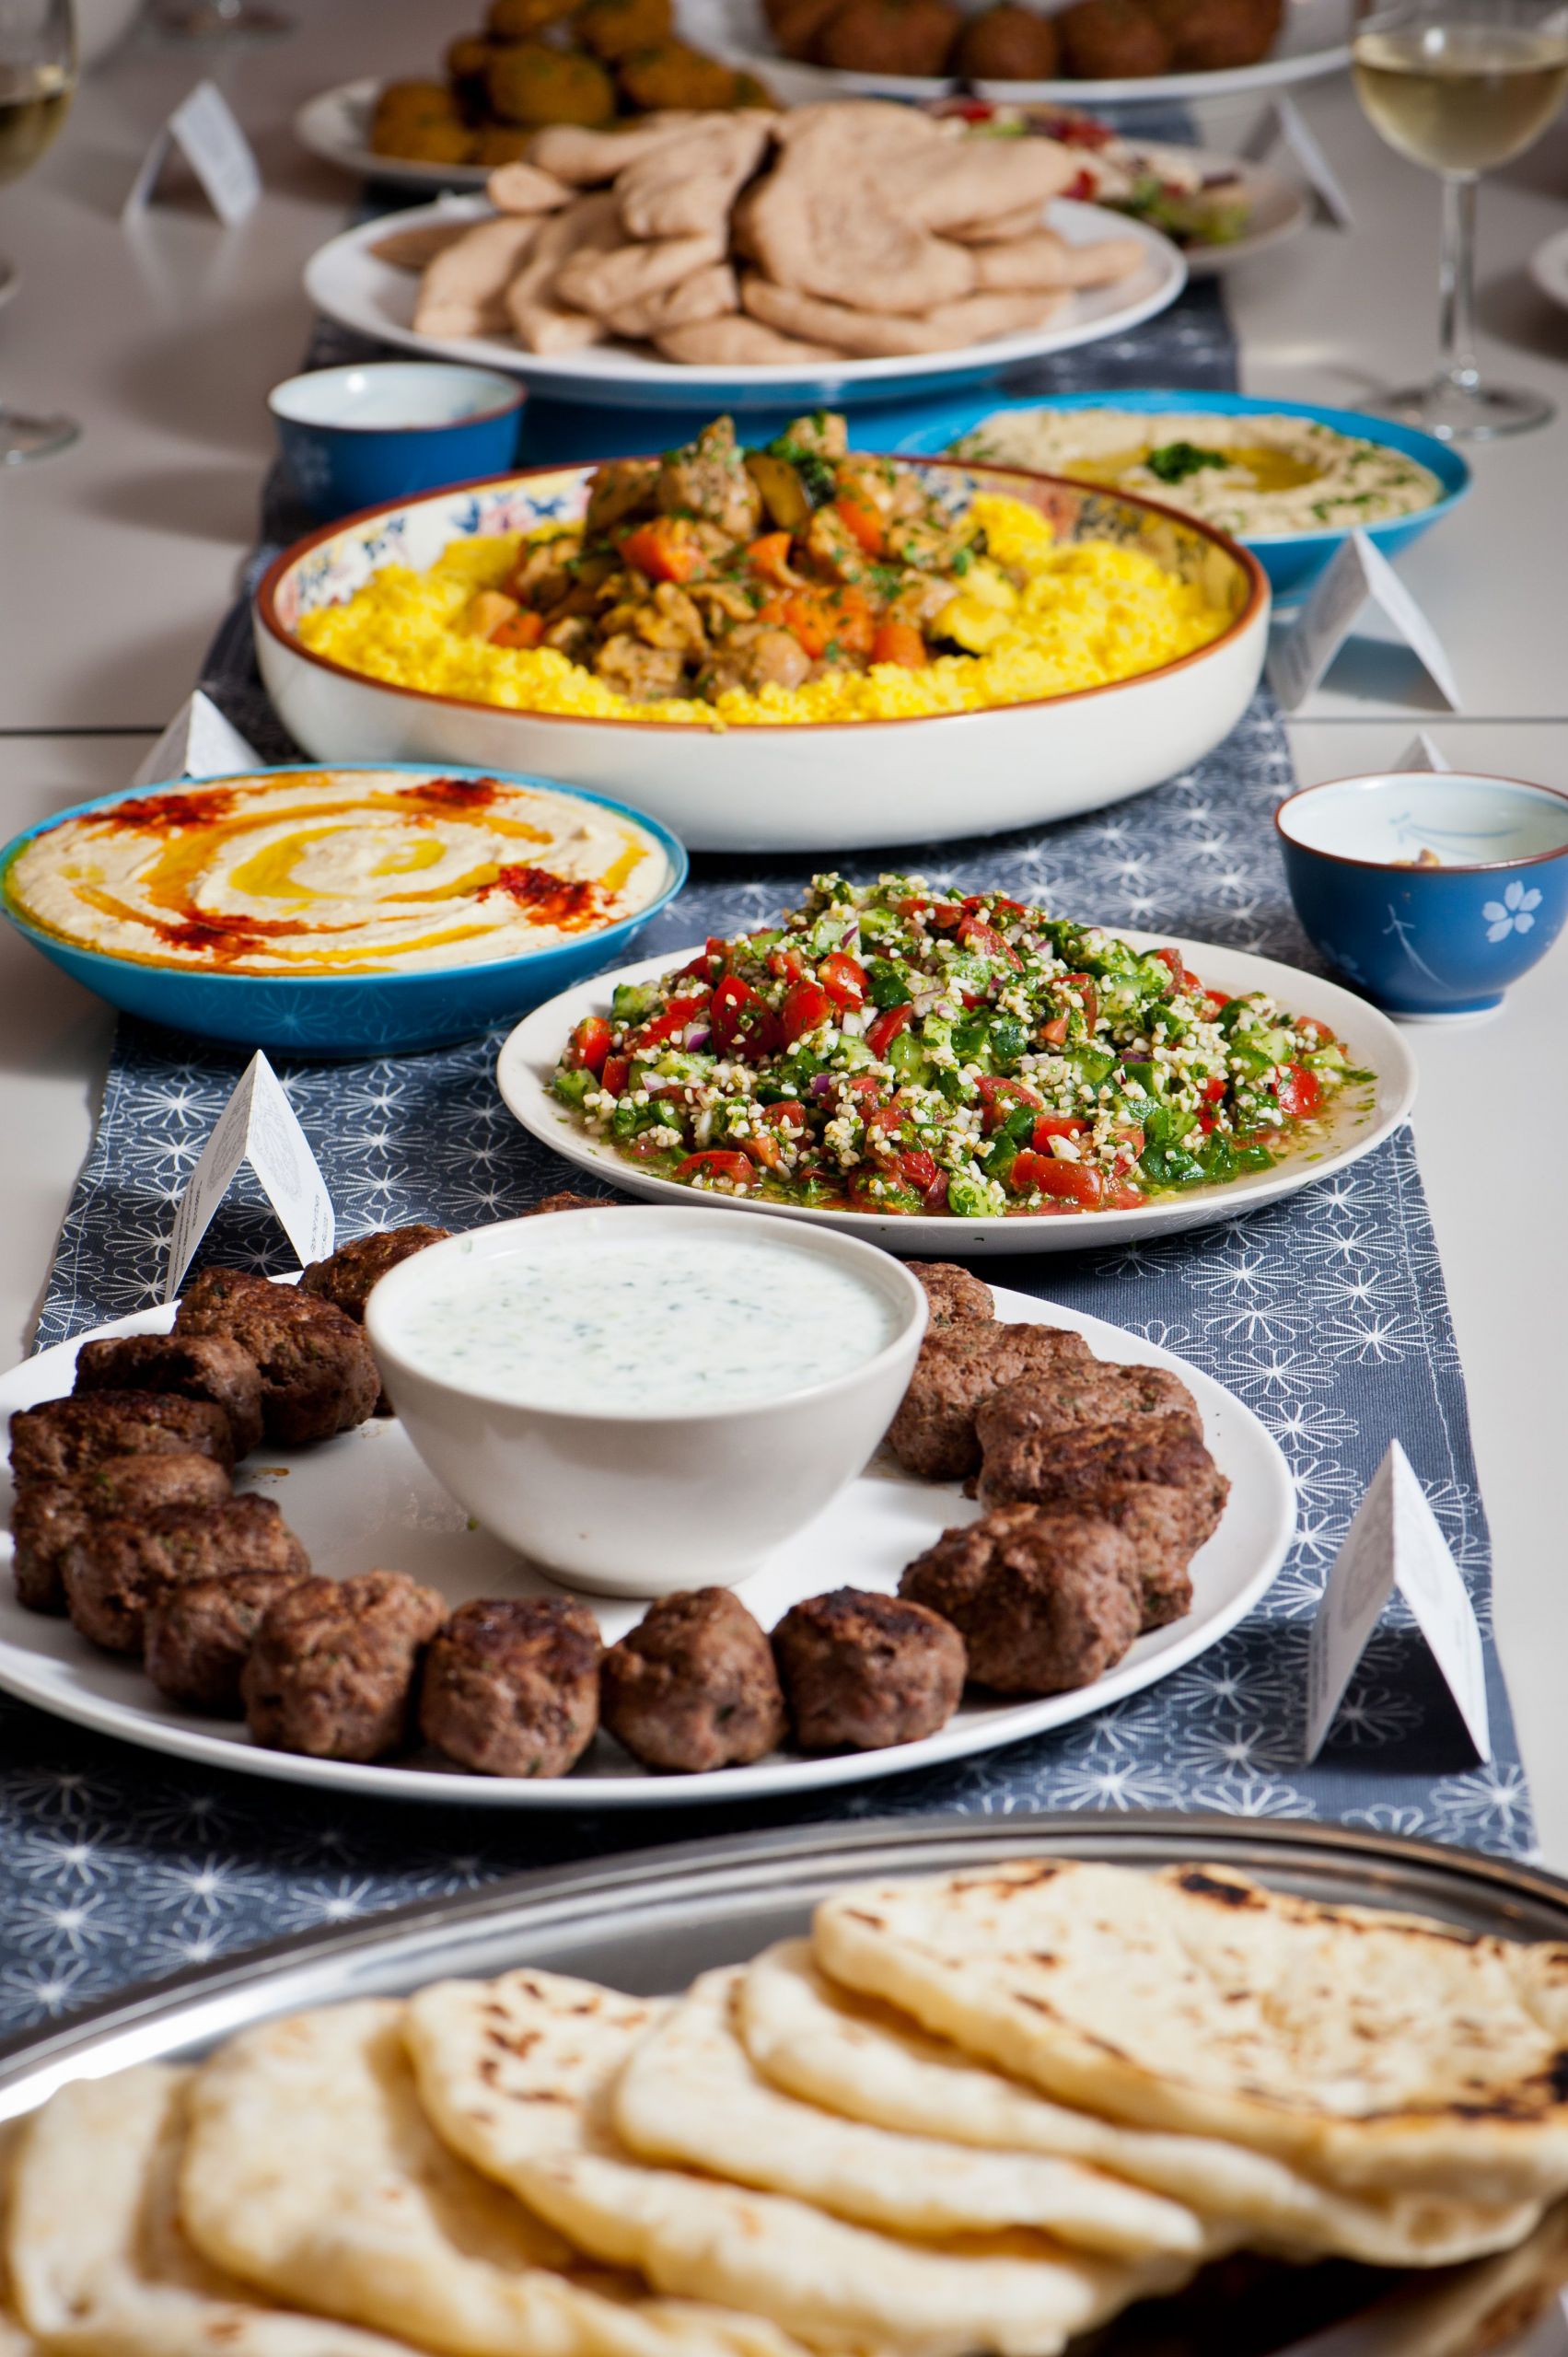 Middle Eastern Dinner Party Ideas
 Home made Middle Eastern Feast